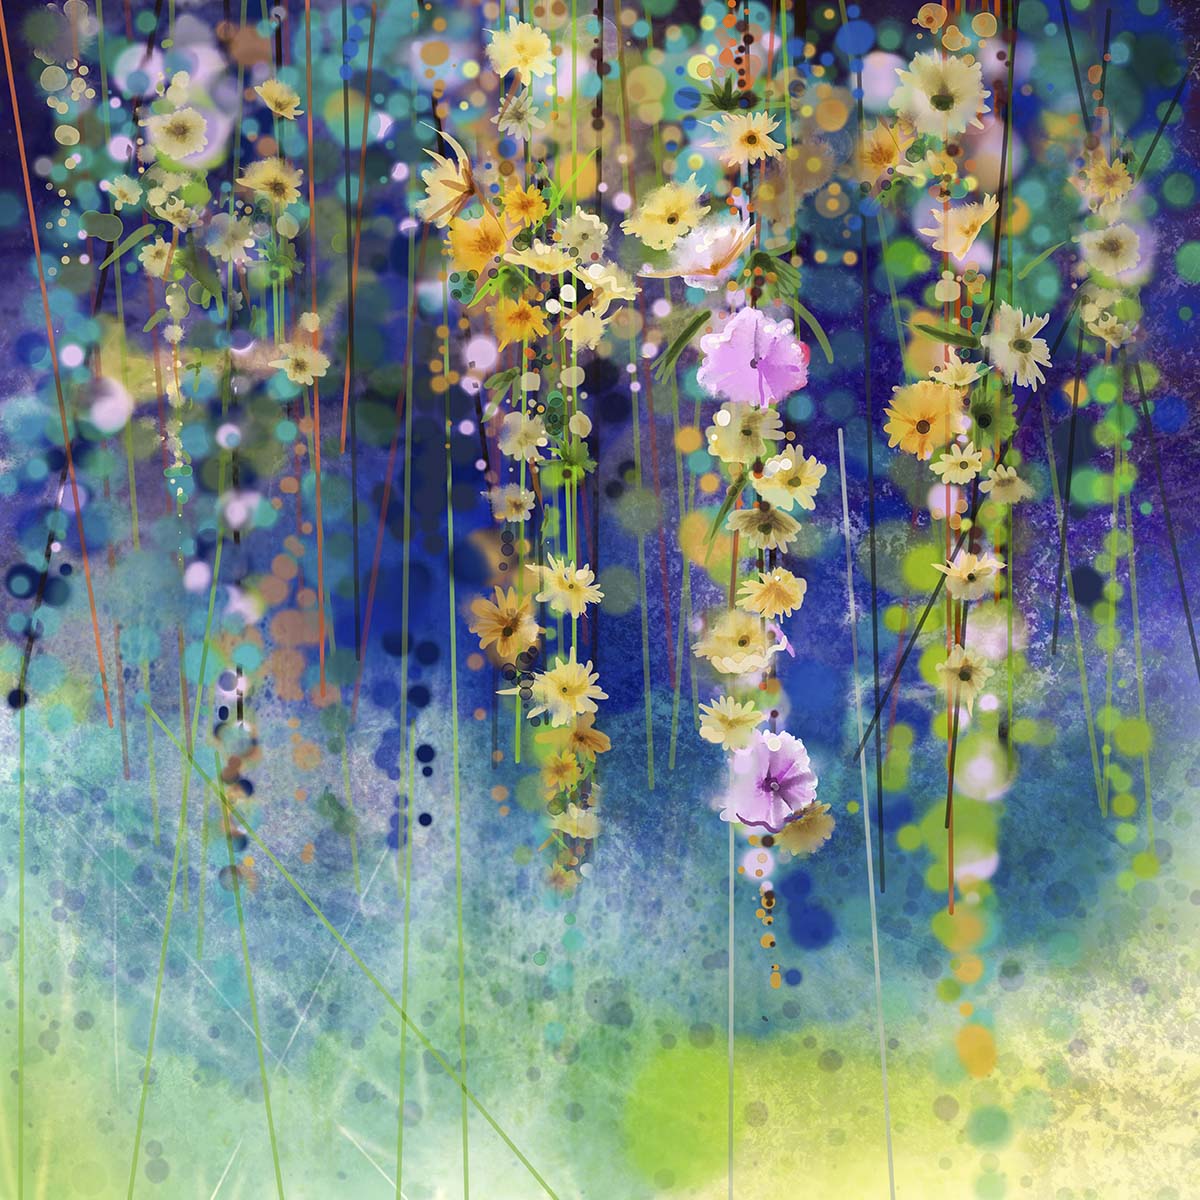 A painting of flowers from strings